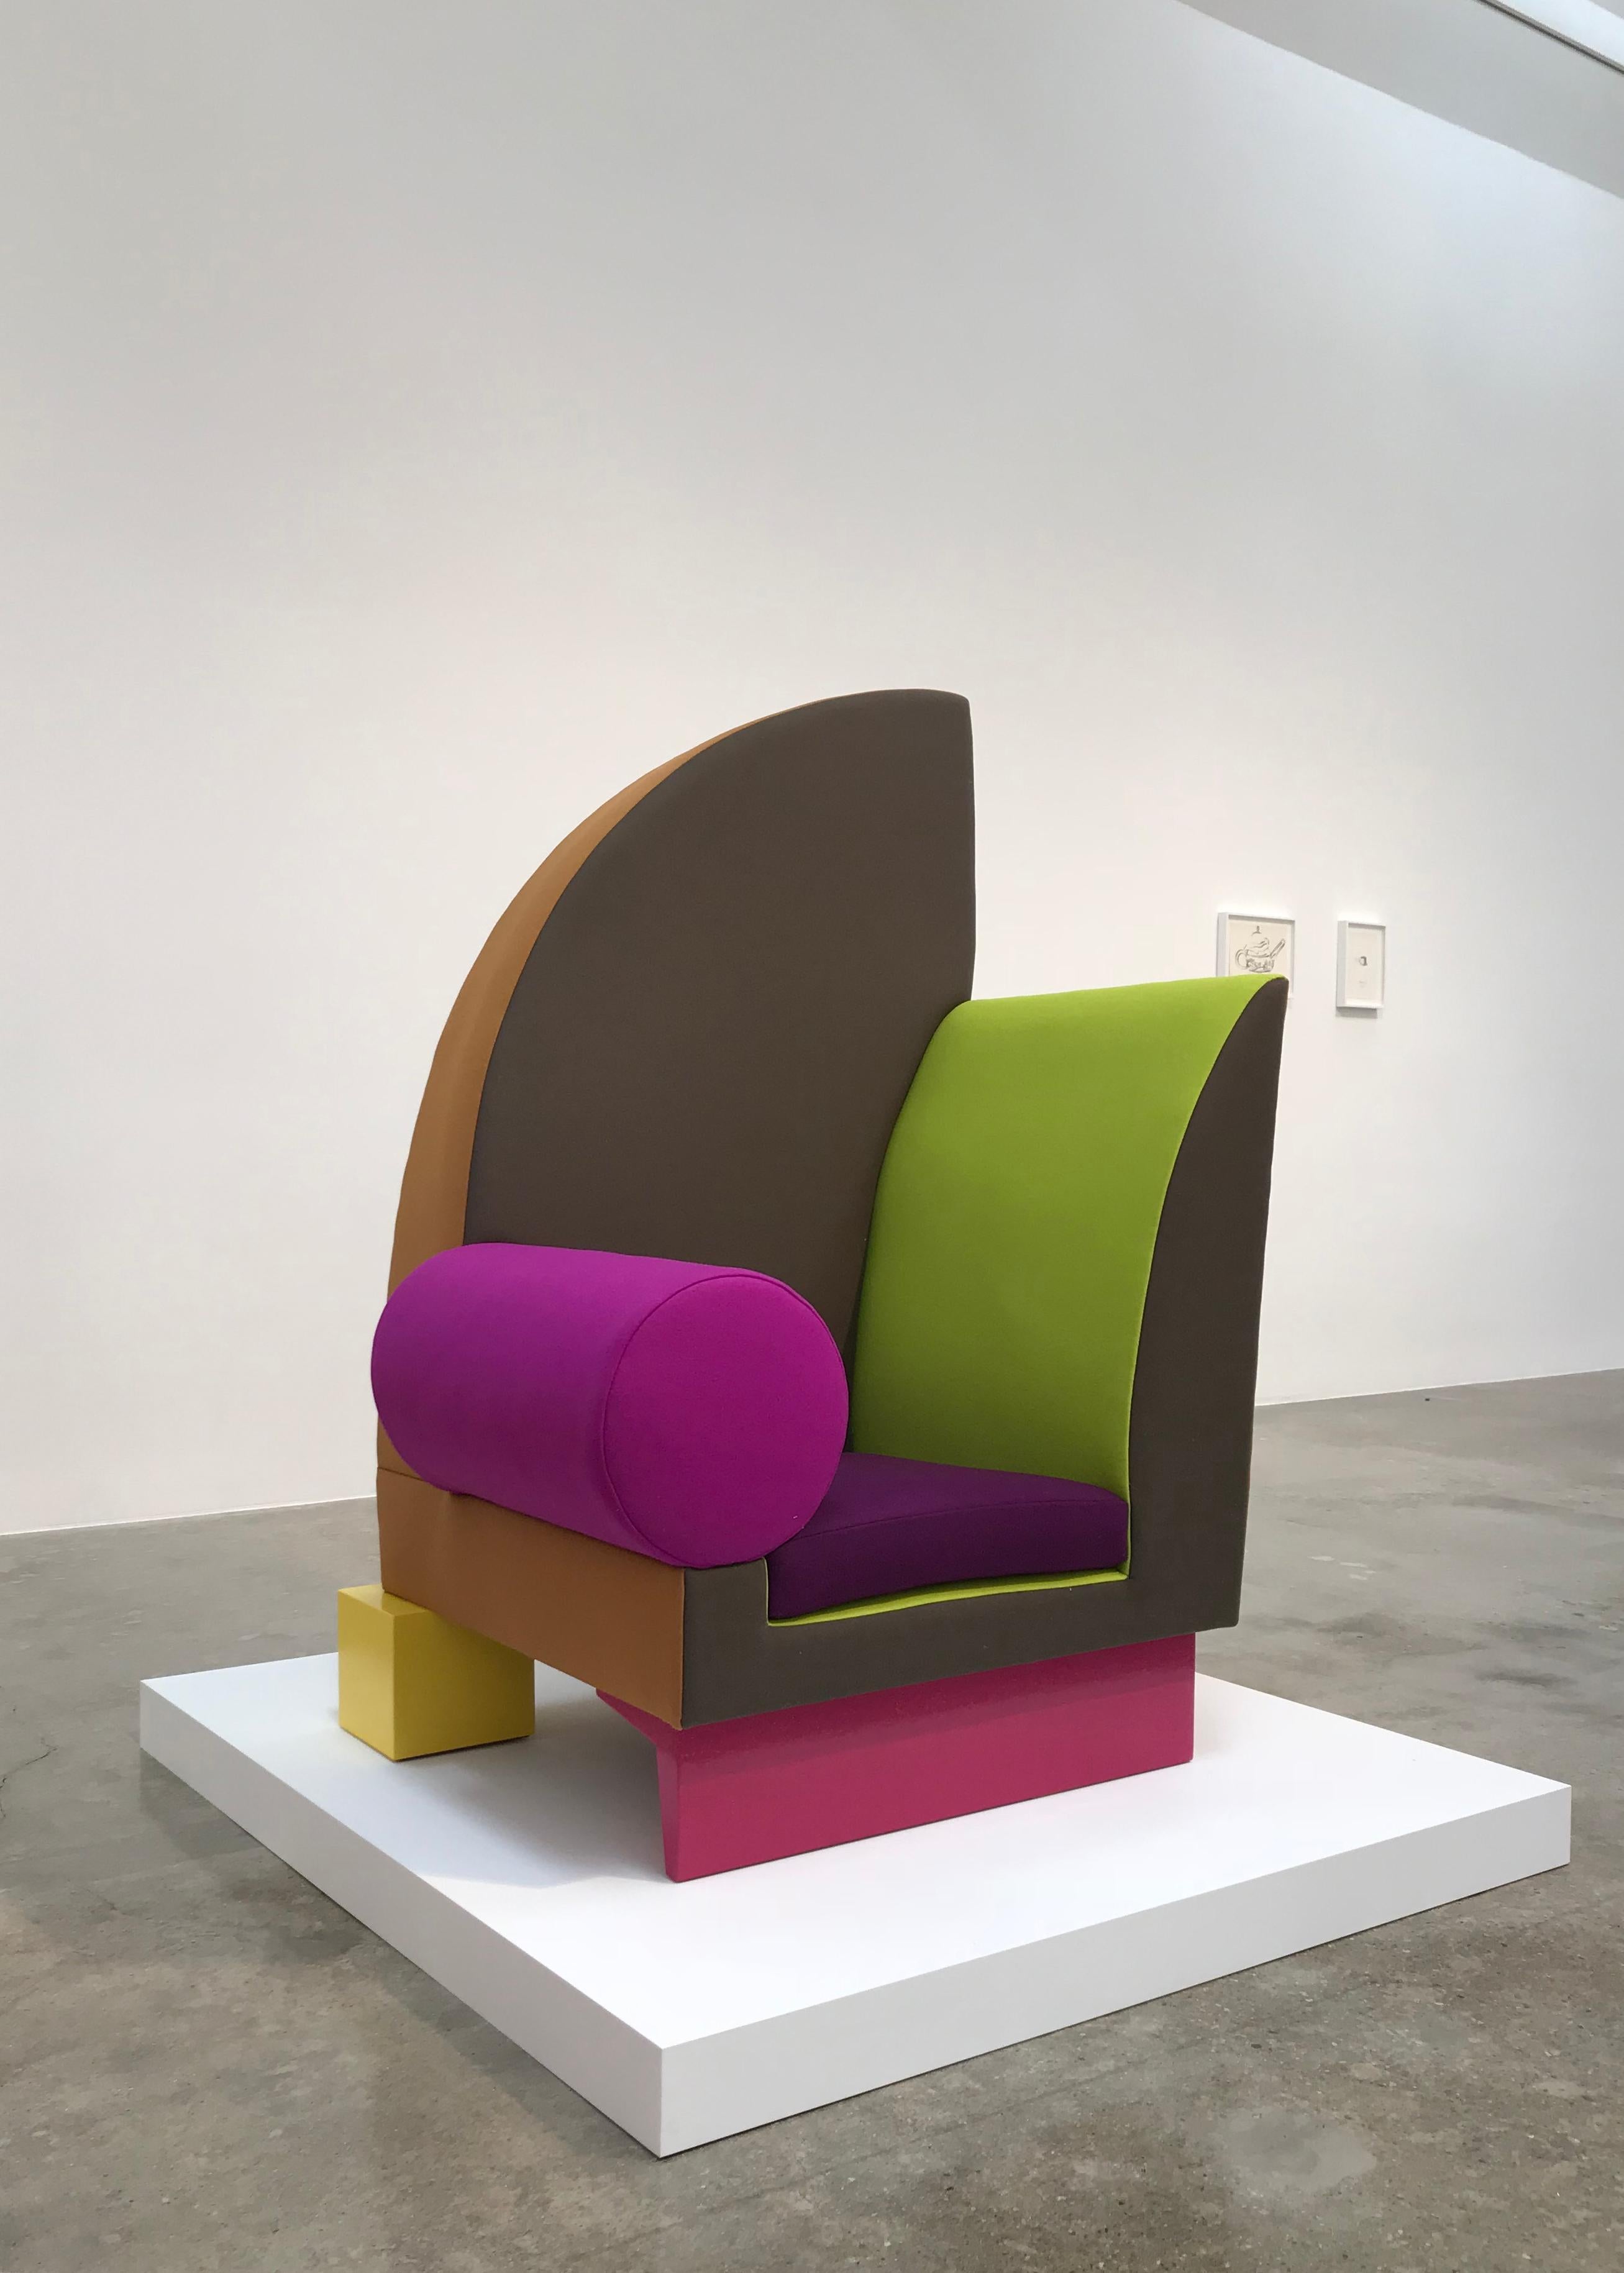 peter shire bel air chair